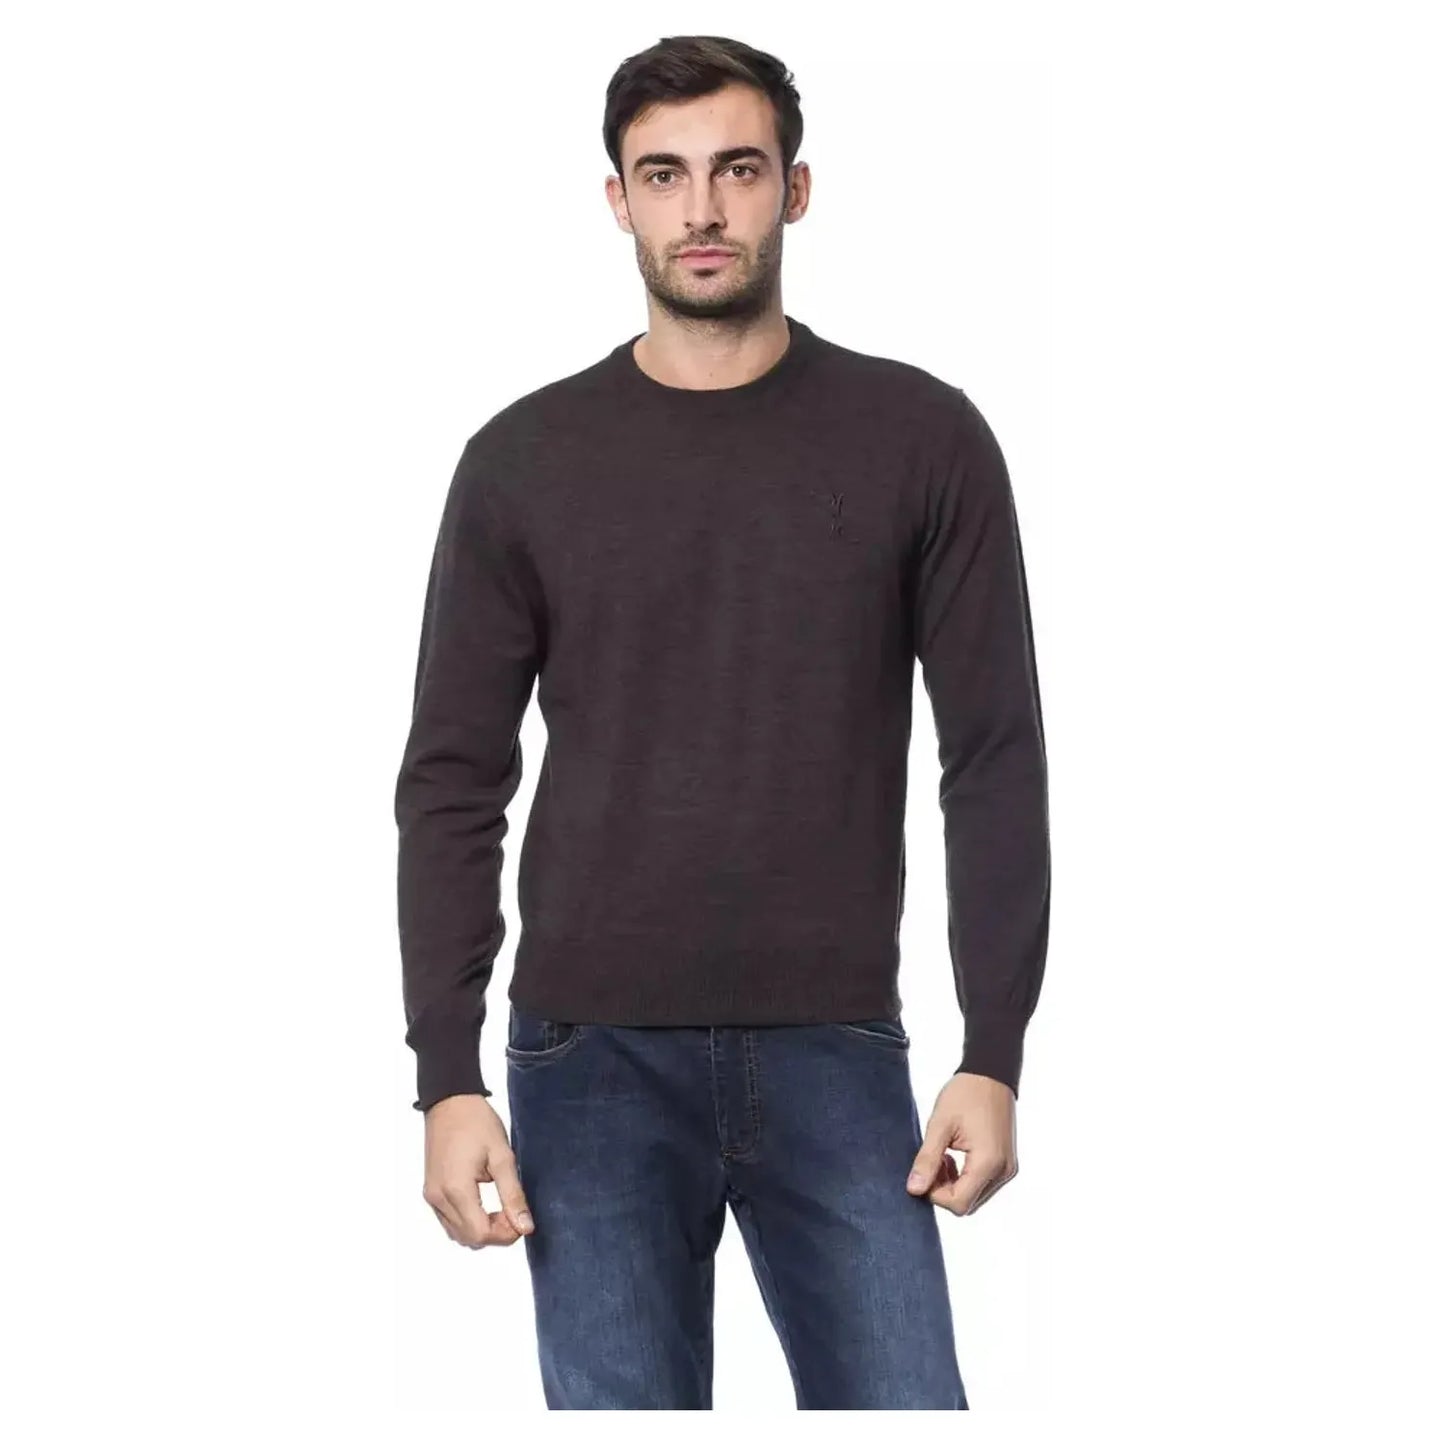 Billionaire Italian Couture Elegant Embroidered Merino Wool Sweater marr-brown-sweater-2 stock_product_image_10482_1666211502-32-28d33db1-e1a.webp